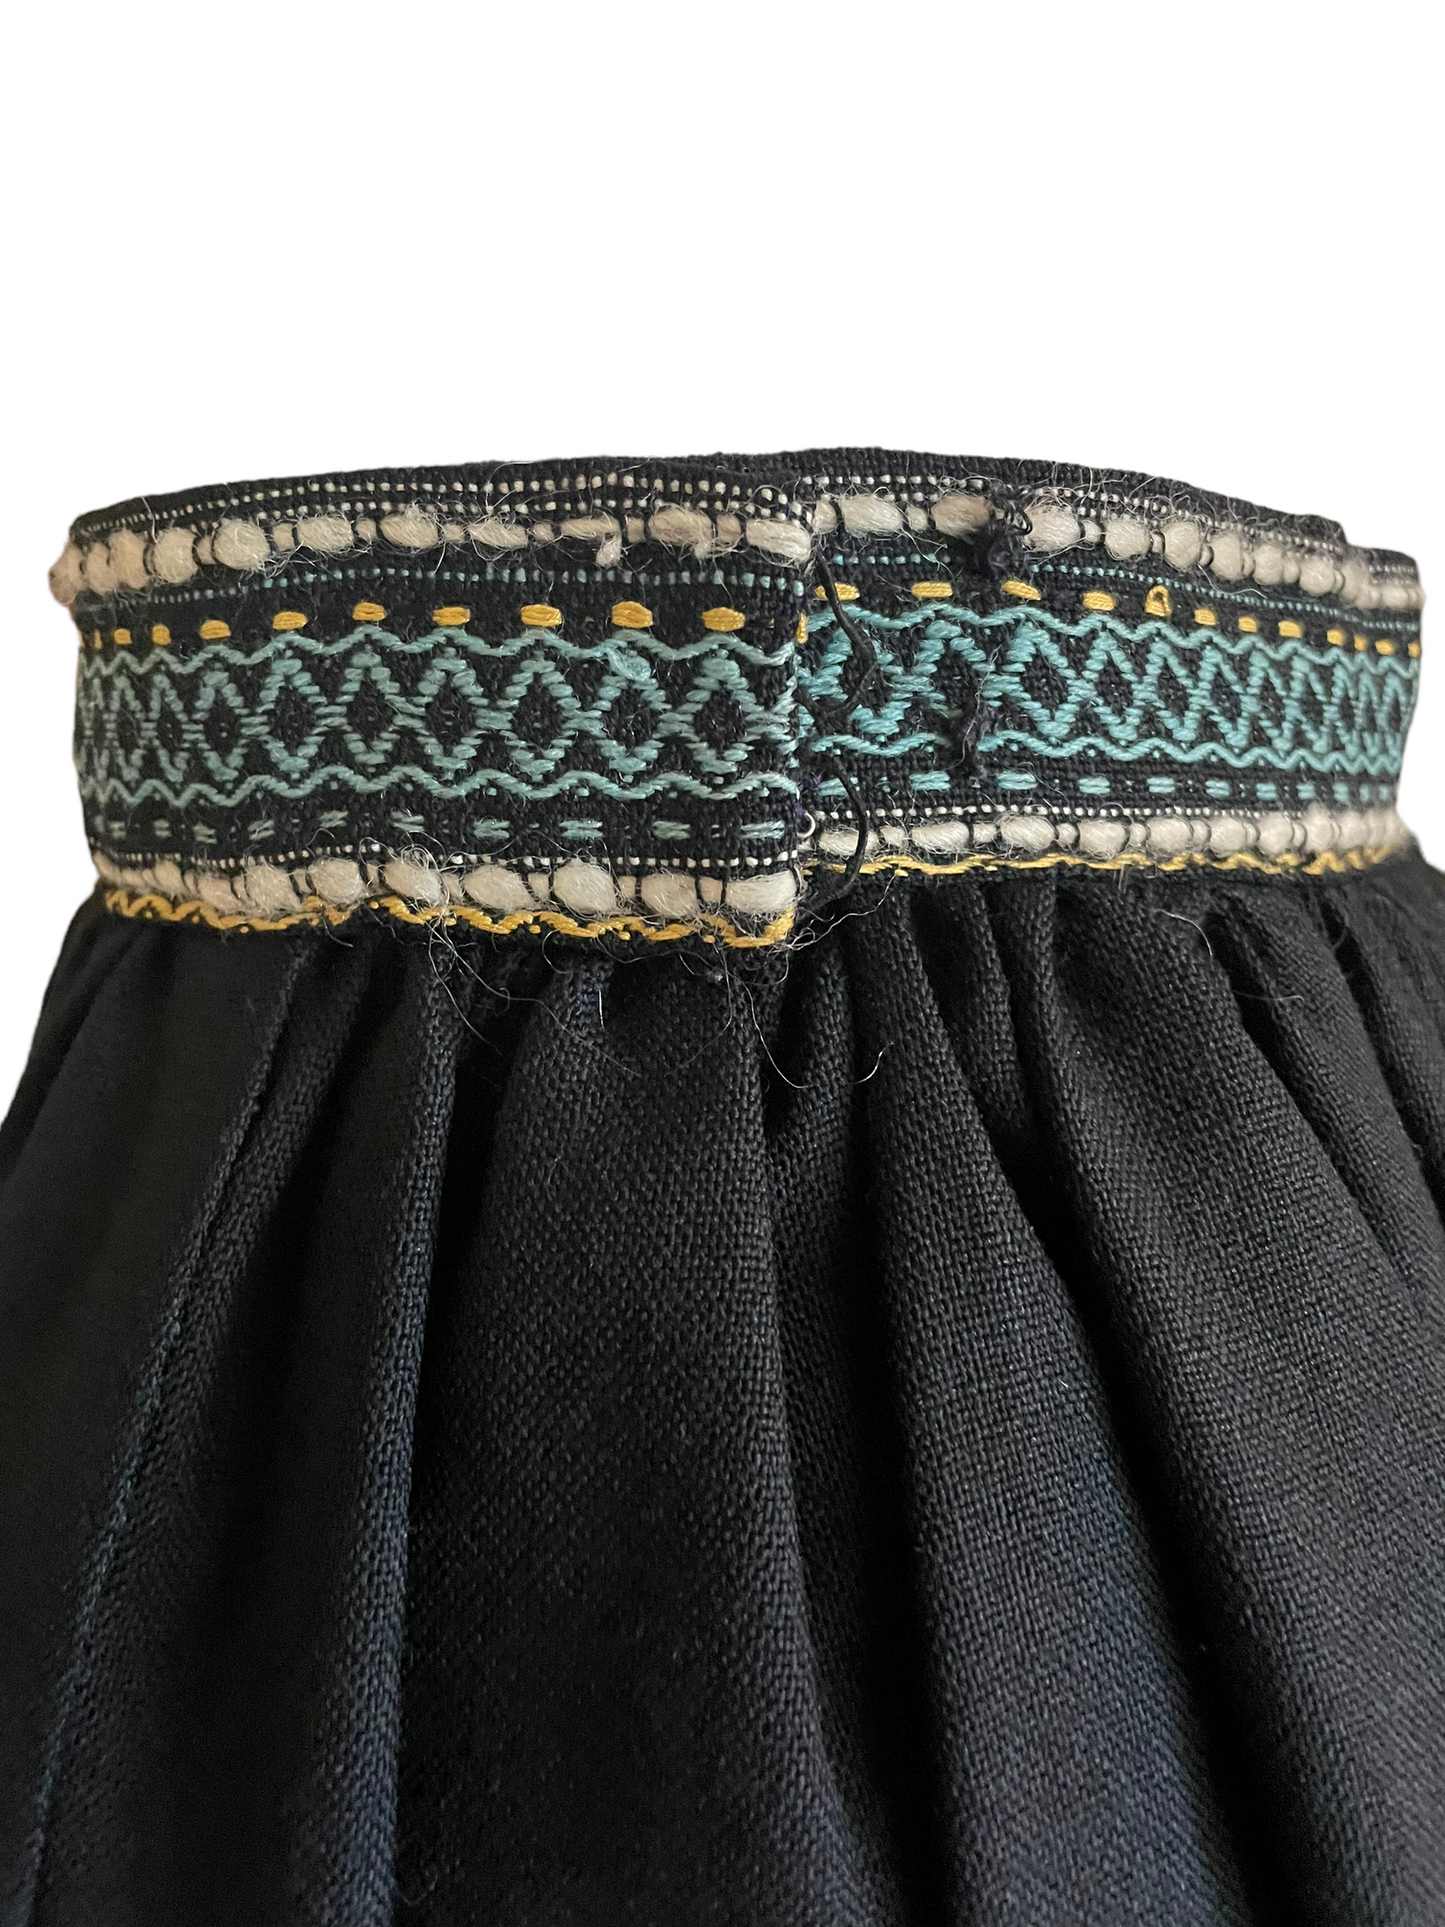 View of closure Vintage 1950s Embroidered Guatemalan Skirt | Barn Owl Seattle | Vintage Guatemalan Skirts